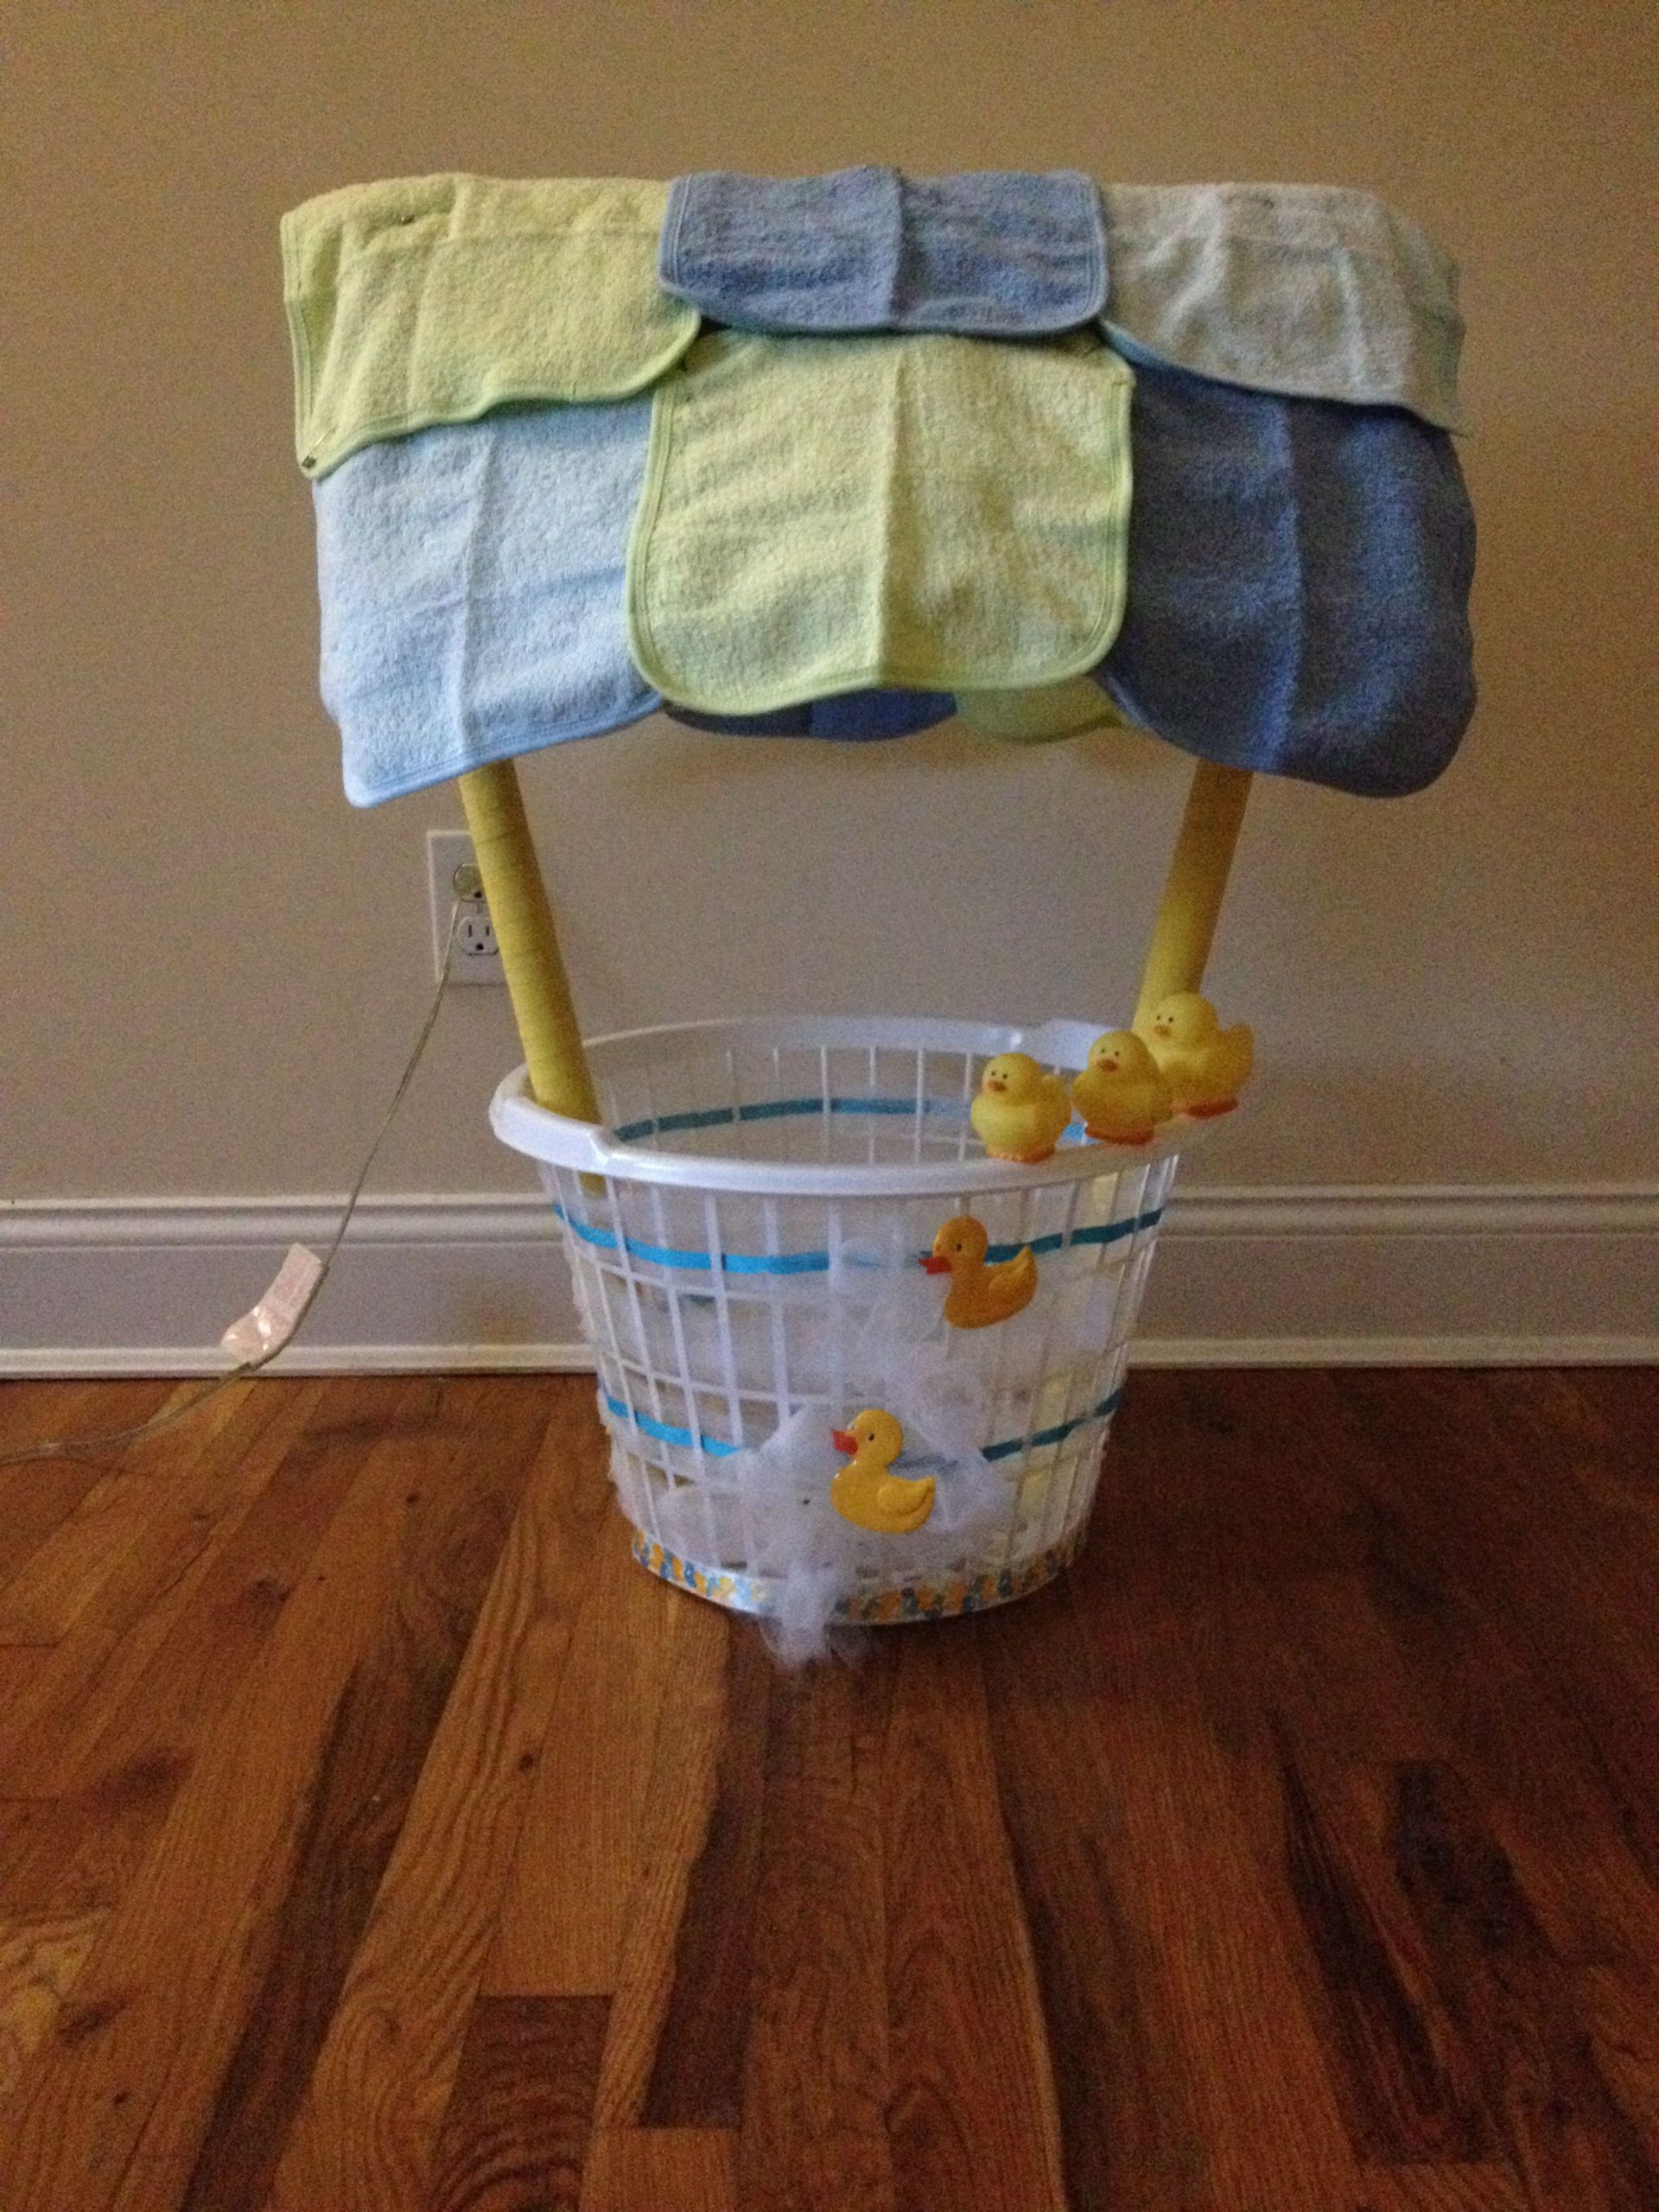 Cute Baby Shower Gift Ideas For Boys
 What another great t idea for baby showers Wishing